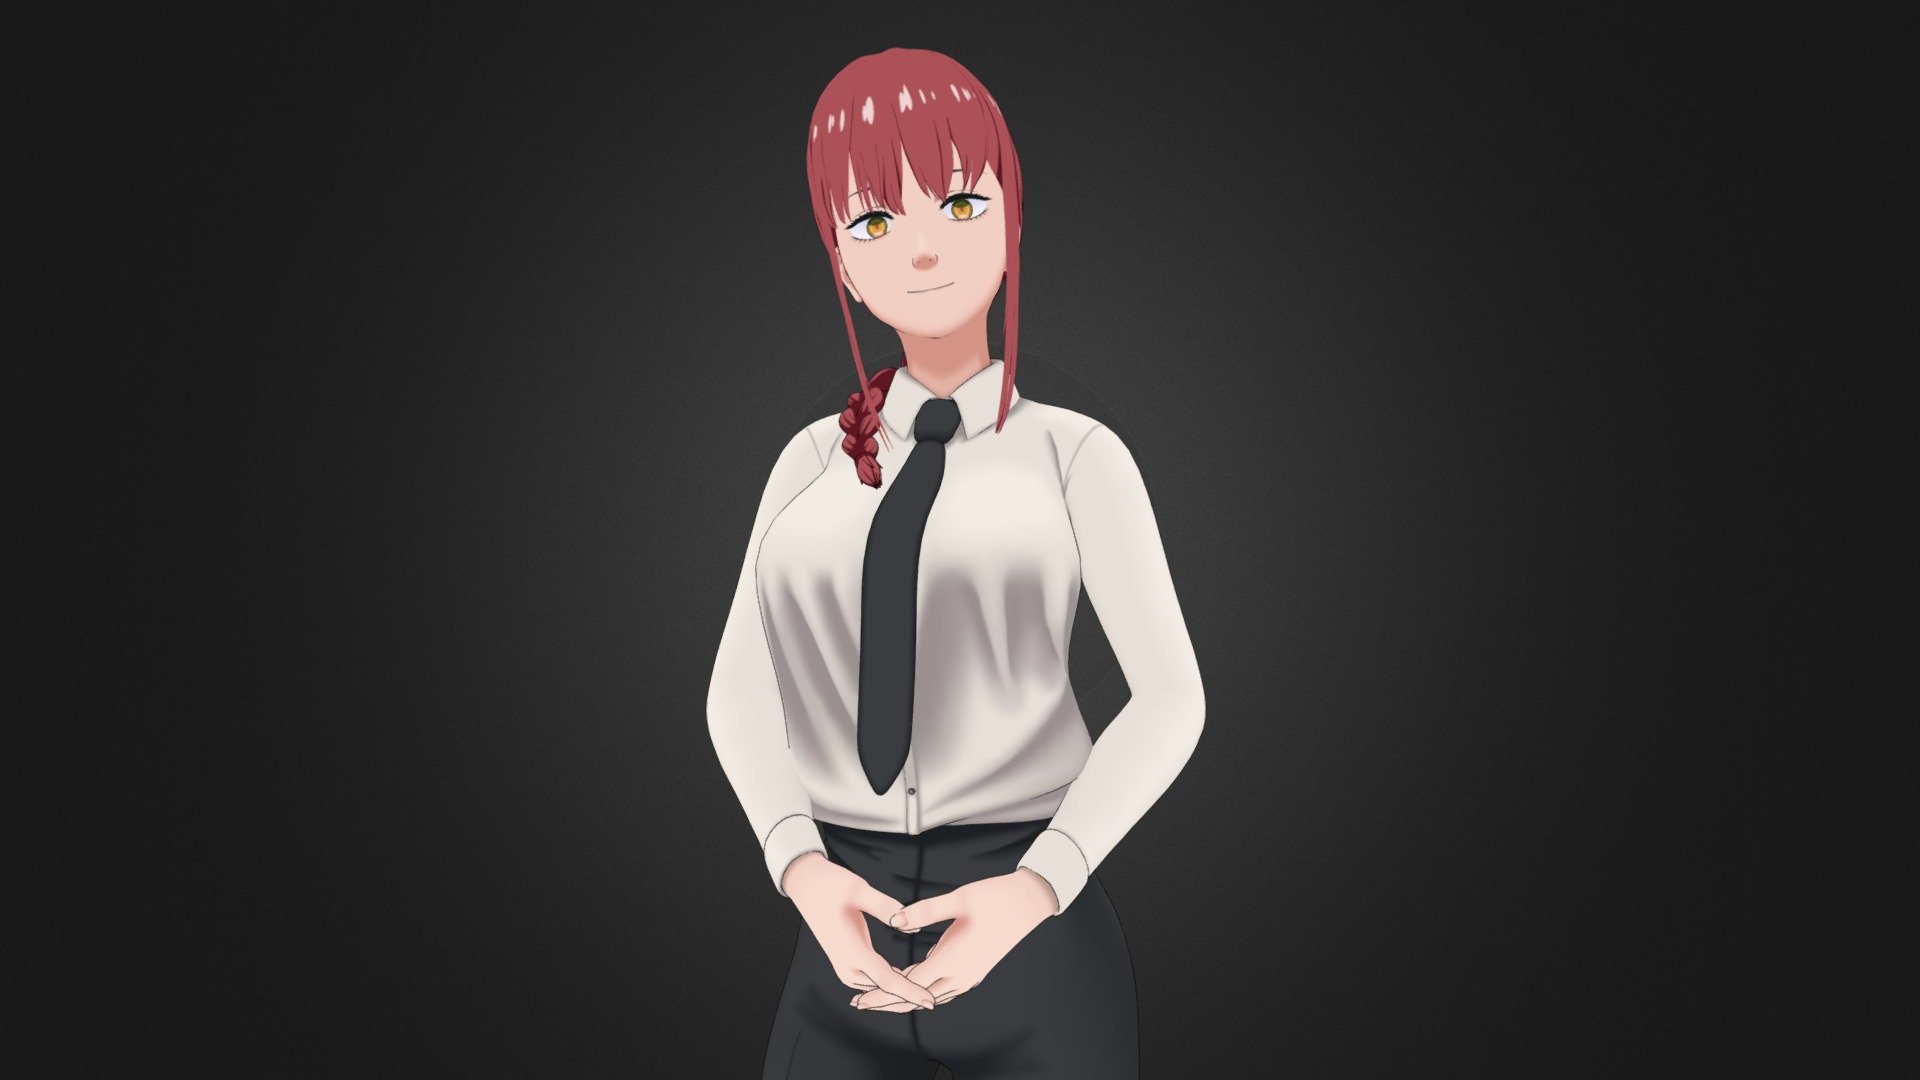 Now on sale!:  https://linktr.ee/ichla3d

【Makima 3D Model】 from “Chainsaw Man”

Model based on Unity’s Humanoid rig and intended for VRChat.





 - Makima (VRChat) ◆ マキマ (Chainsaw Man, チェンソーマン) - 3D model by Ichla3D • (COMMISSIONS OPEN) (@ichla3d) 3d model